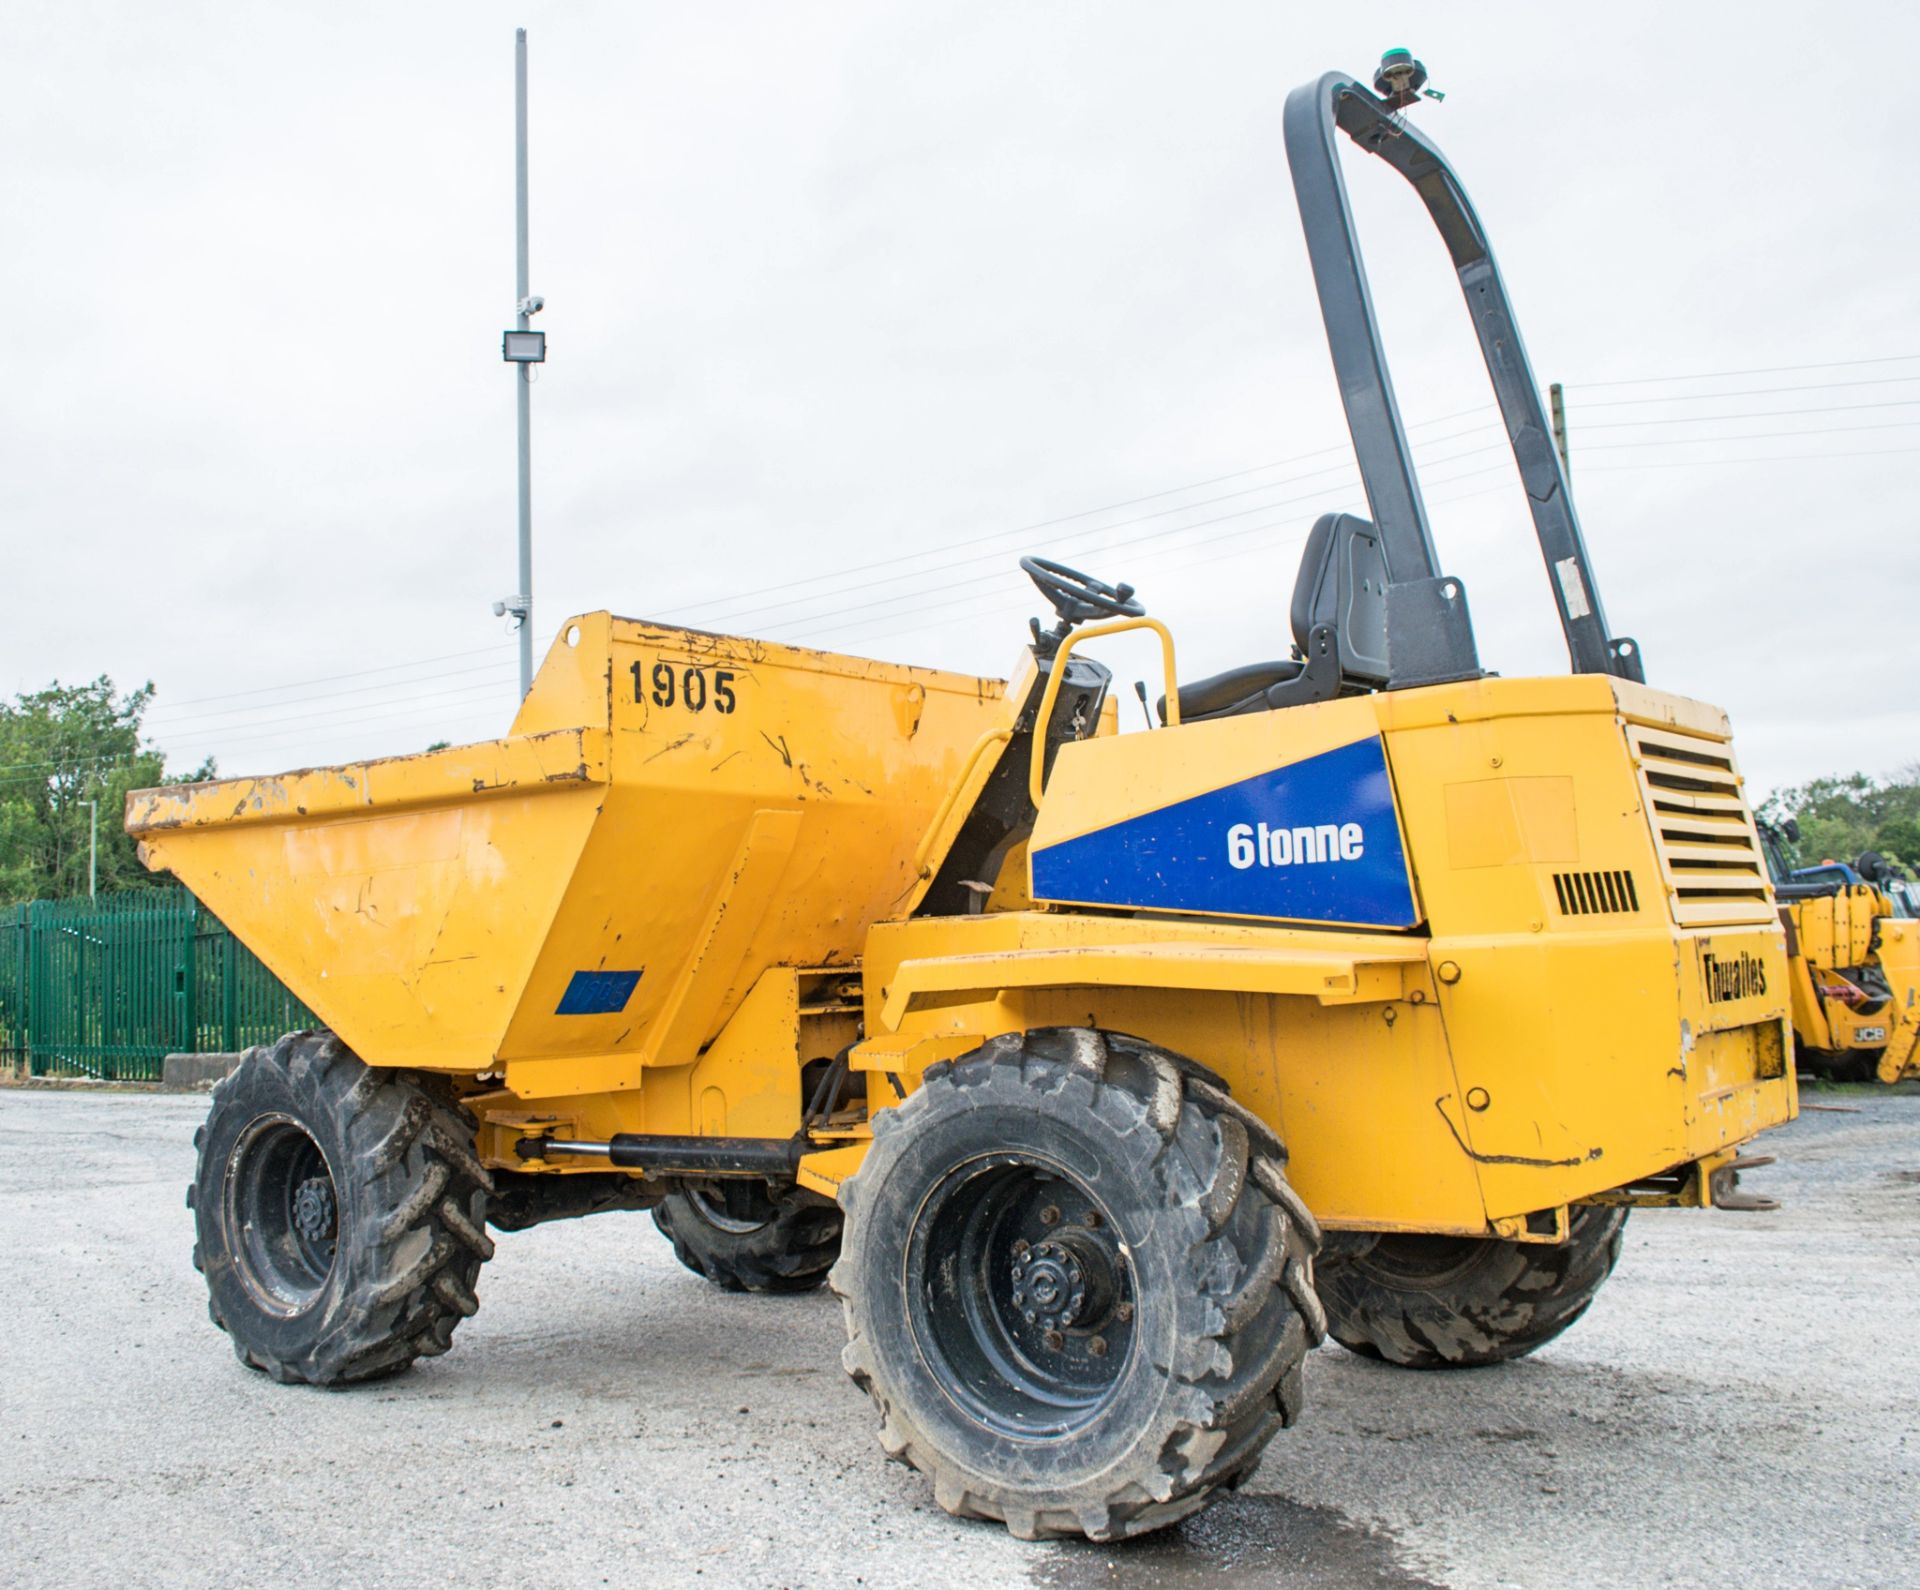 Thwaites 6 tonne straight skip dumper Year: 2005 S/N: 7A7275 Recorded Hours: 3971 1905 - Image 3 of 14